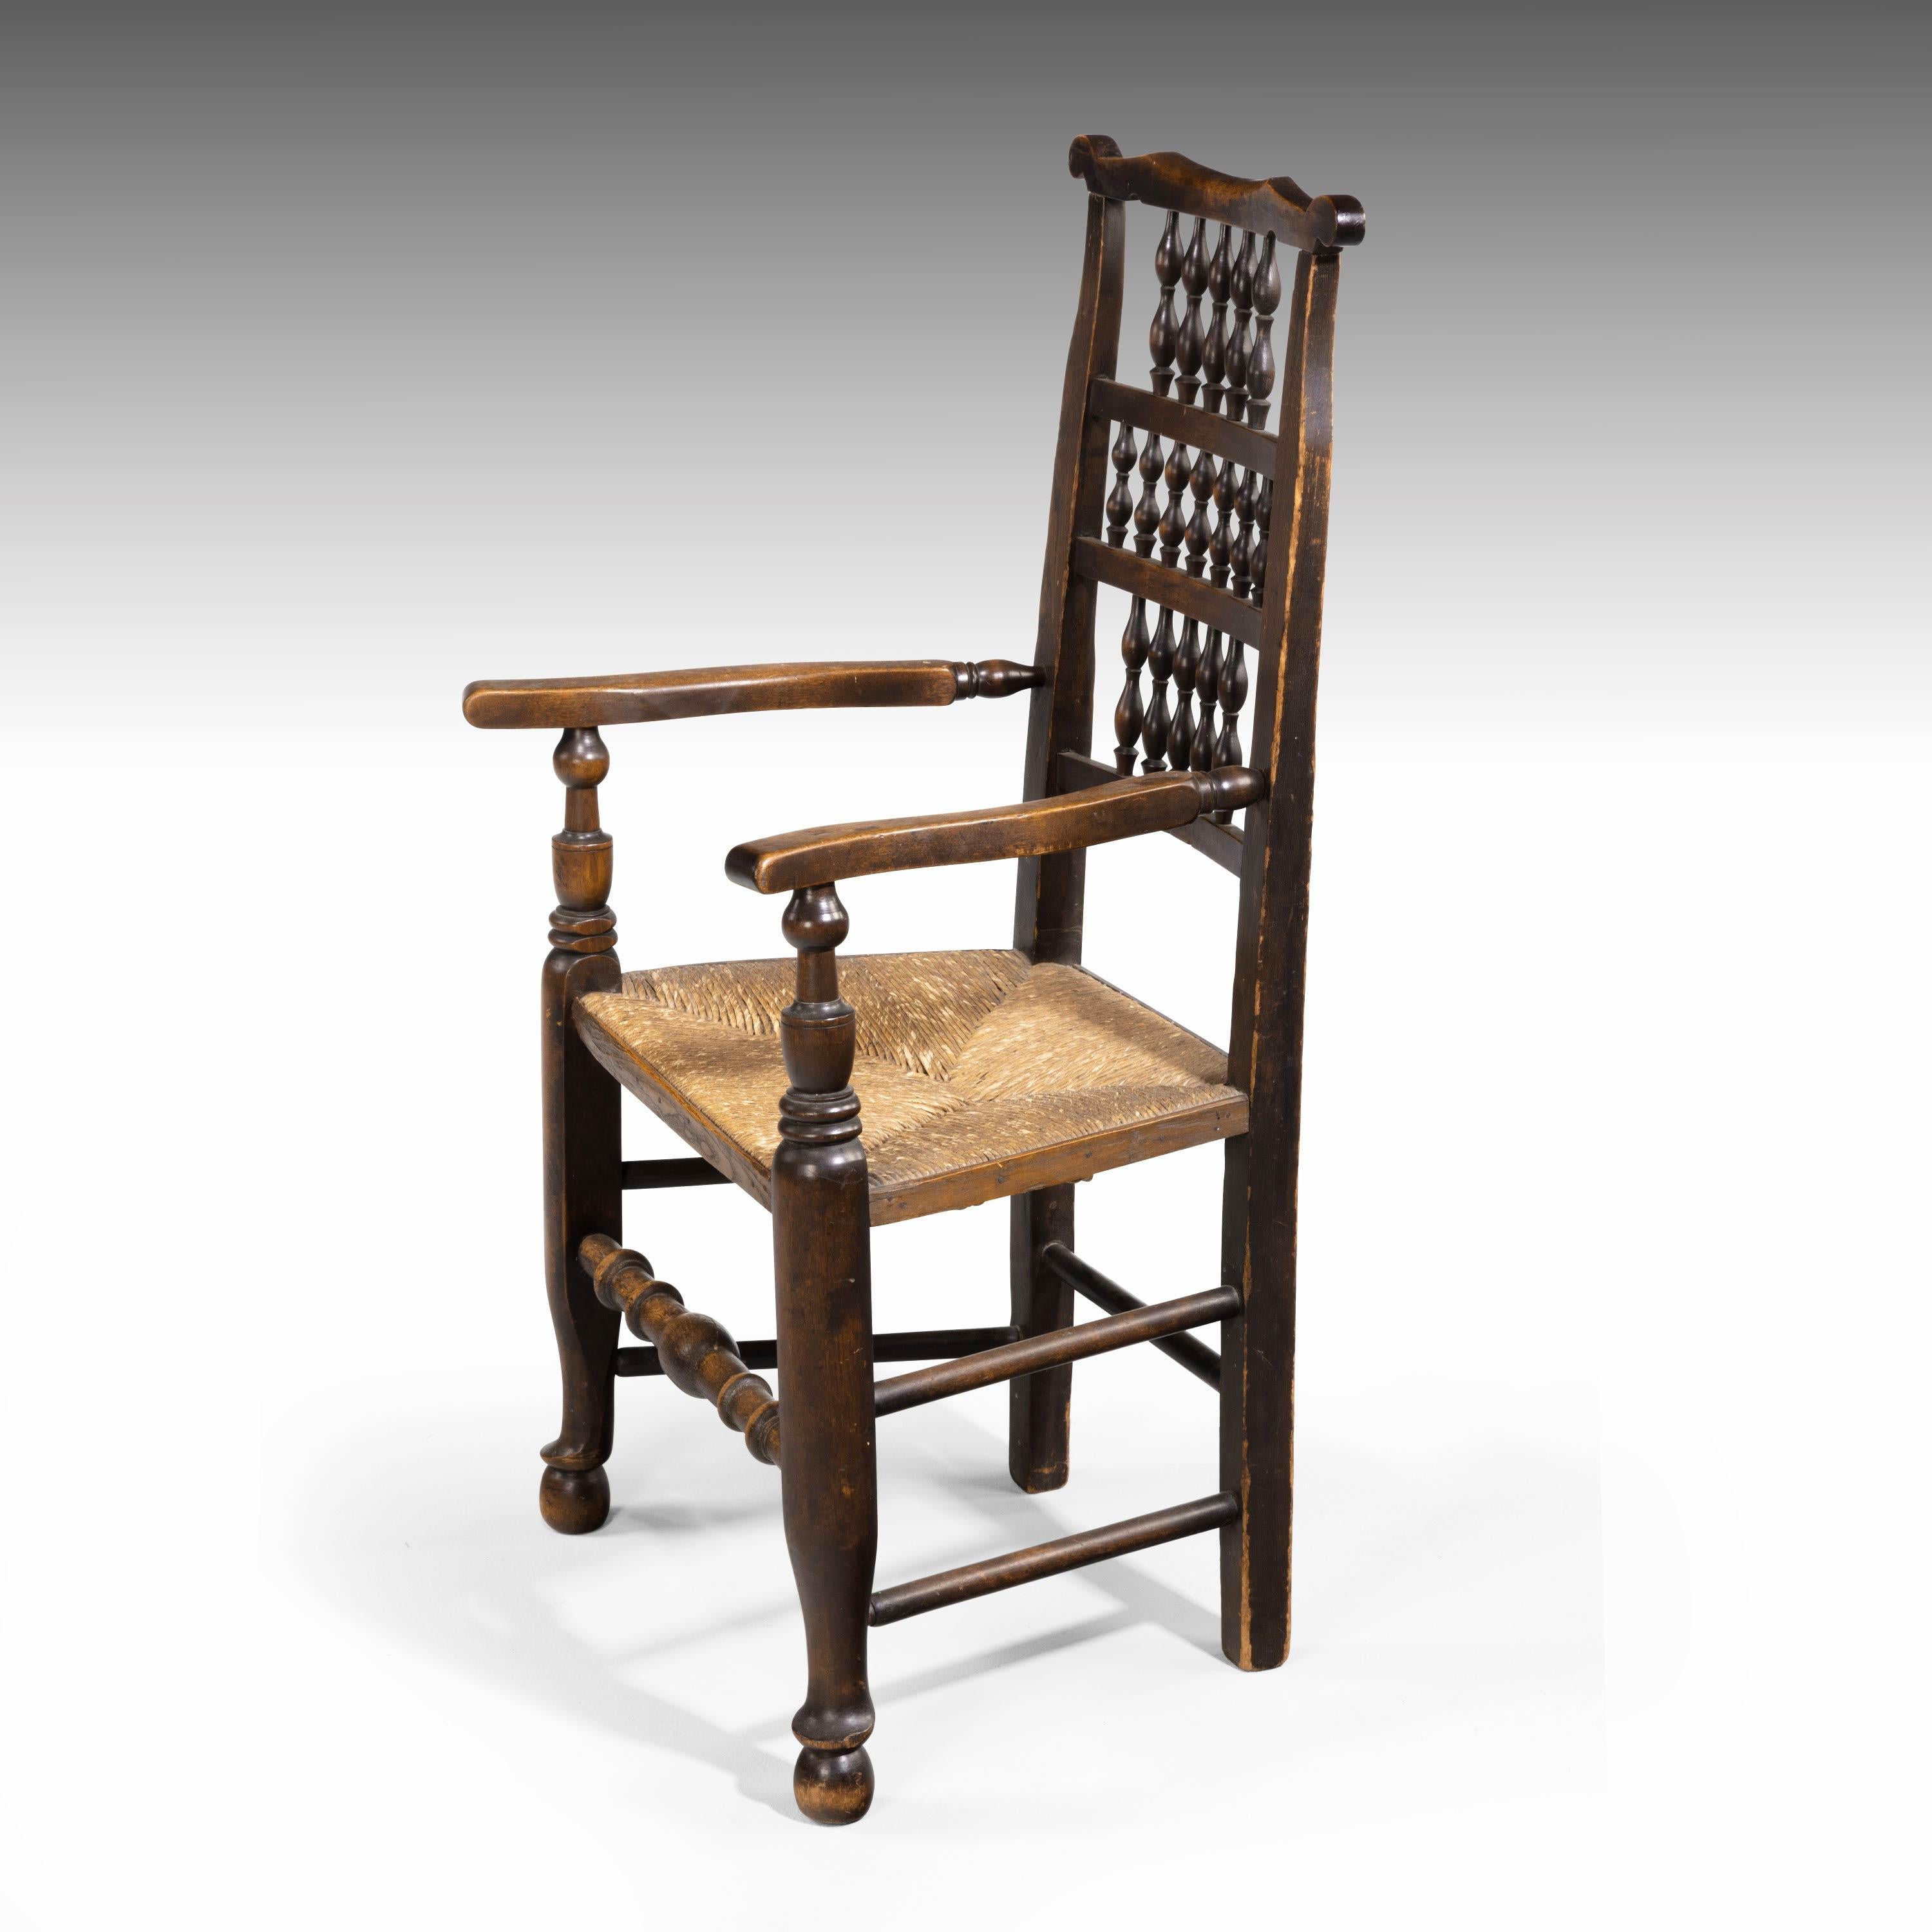 English Attractive Mid-19th Century Elm Spindleback Armchair